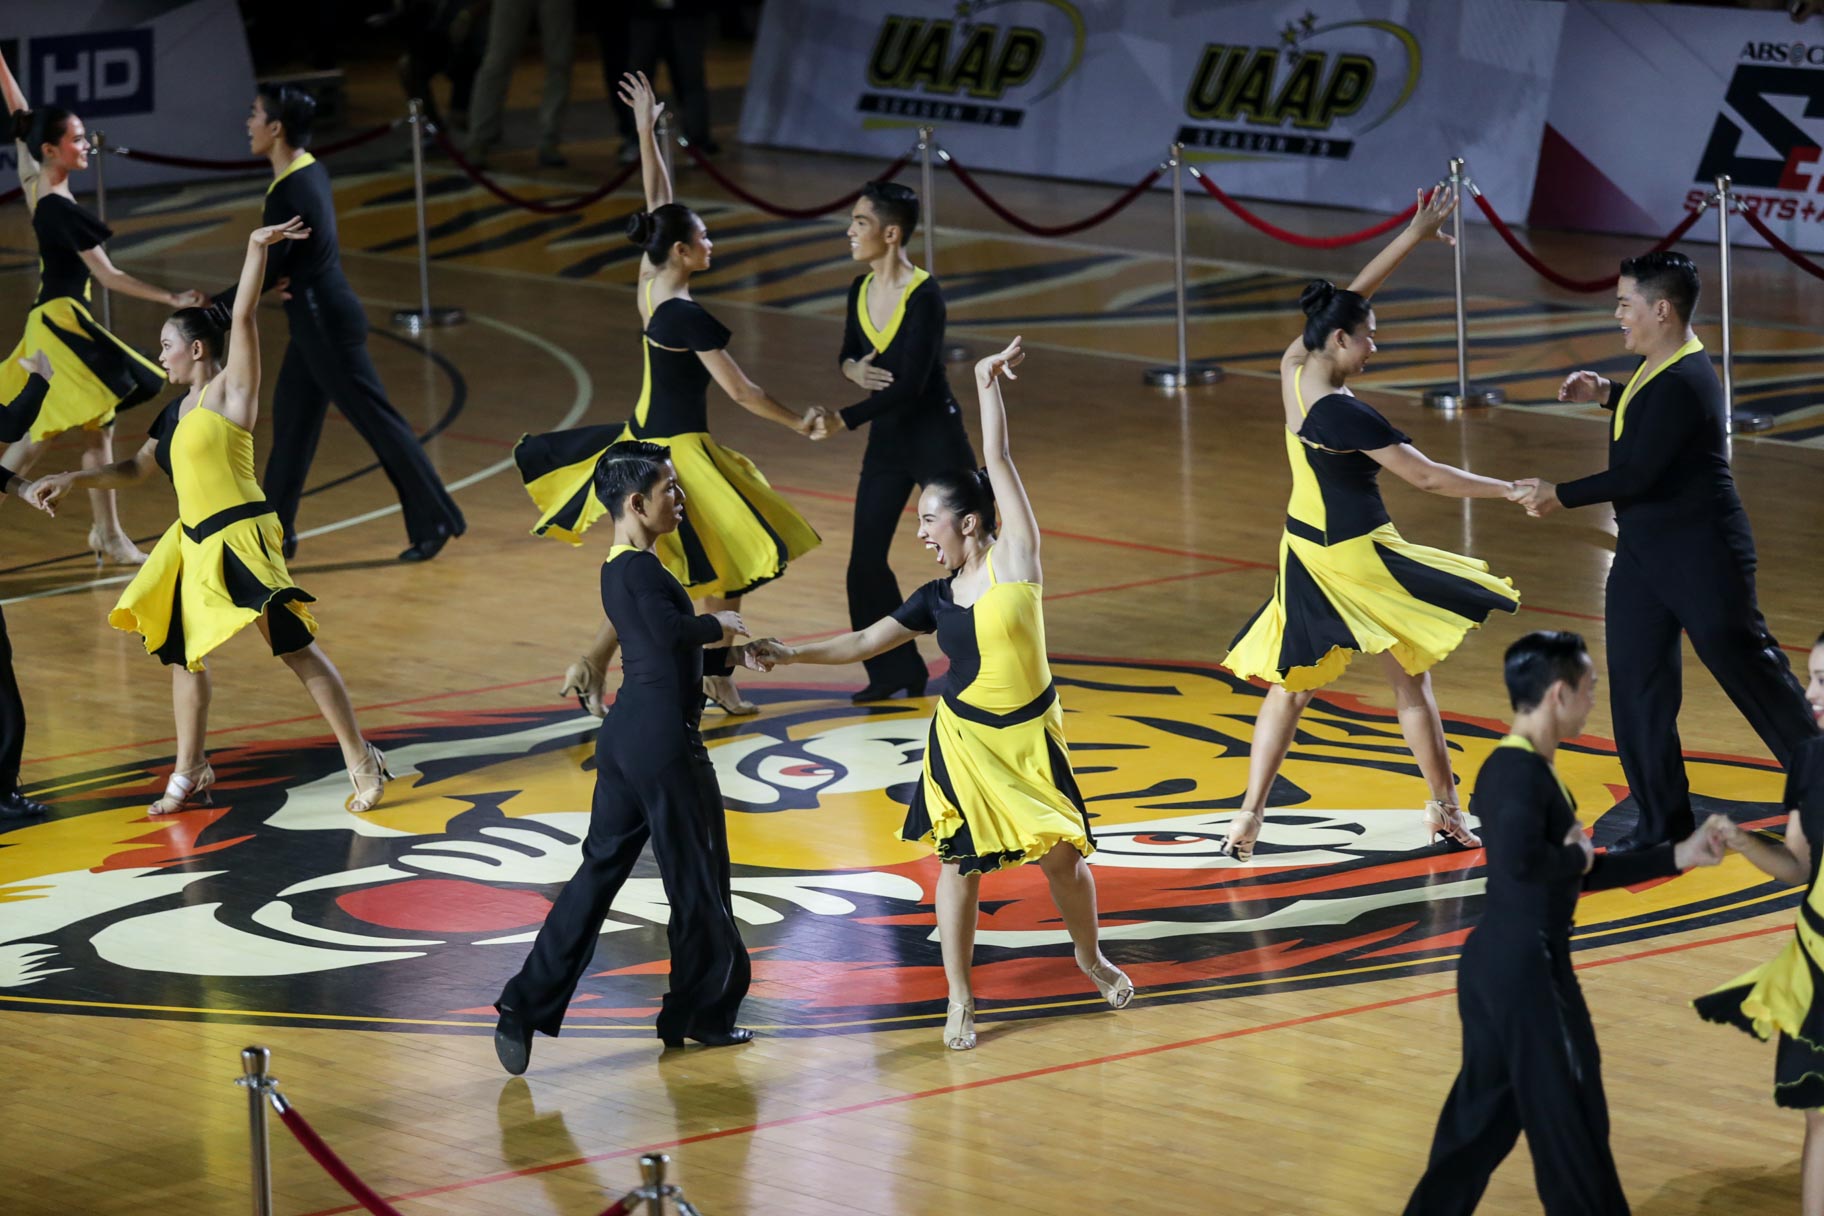 UST' Sinag Ballroom Dance Company during the UAAP ballroom dancing competition. Photo by Tristan Tamayo/INQUIRER.net